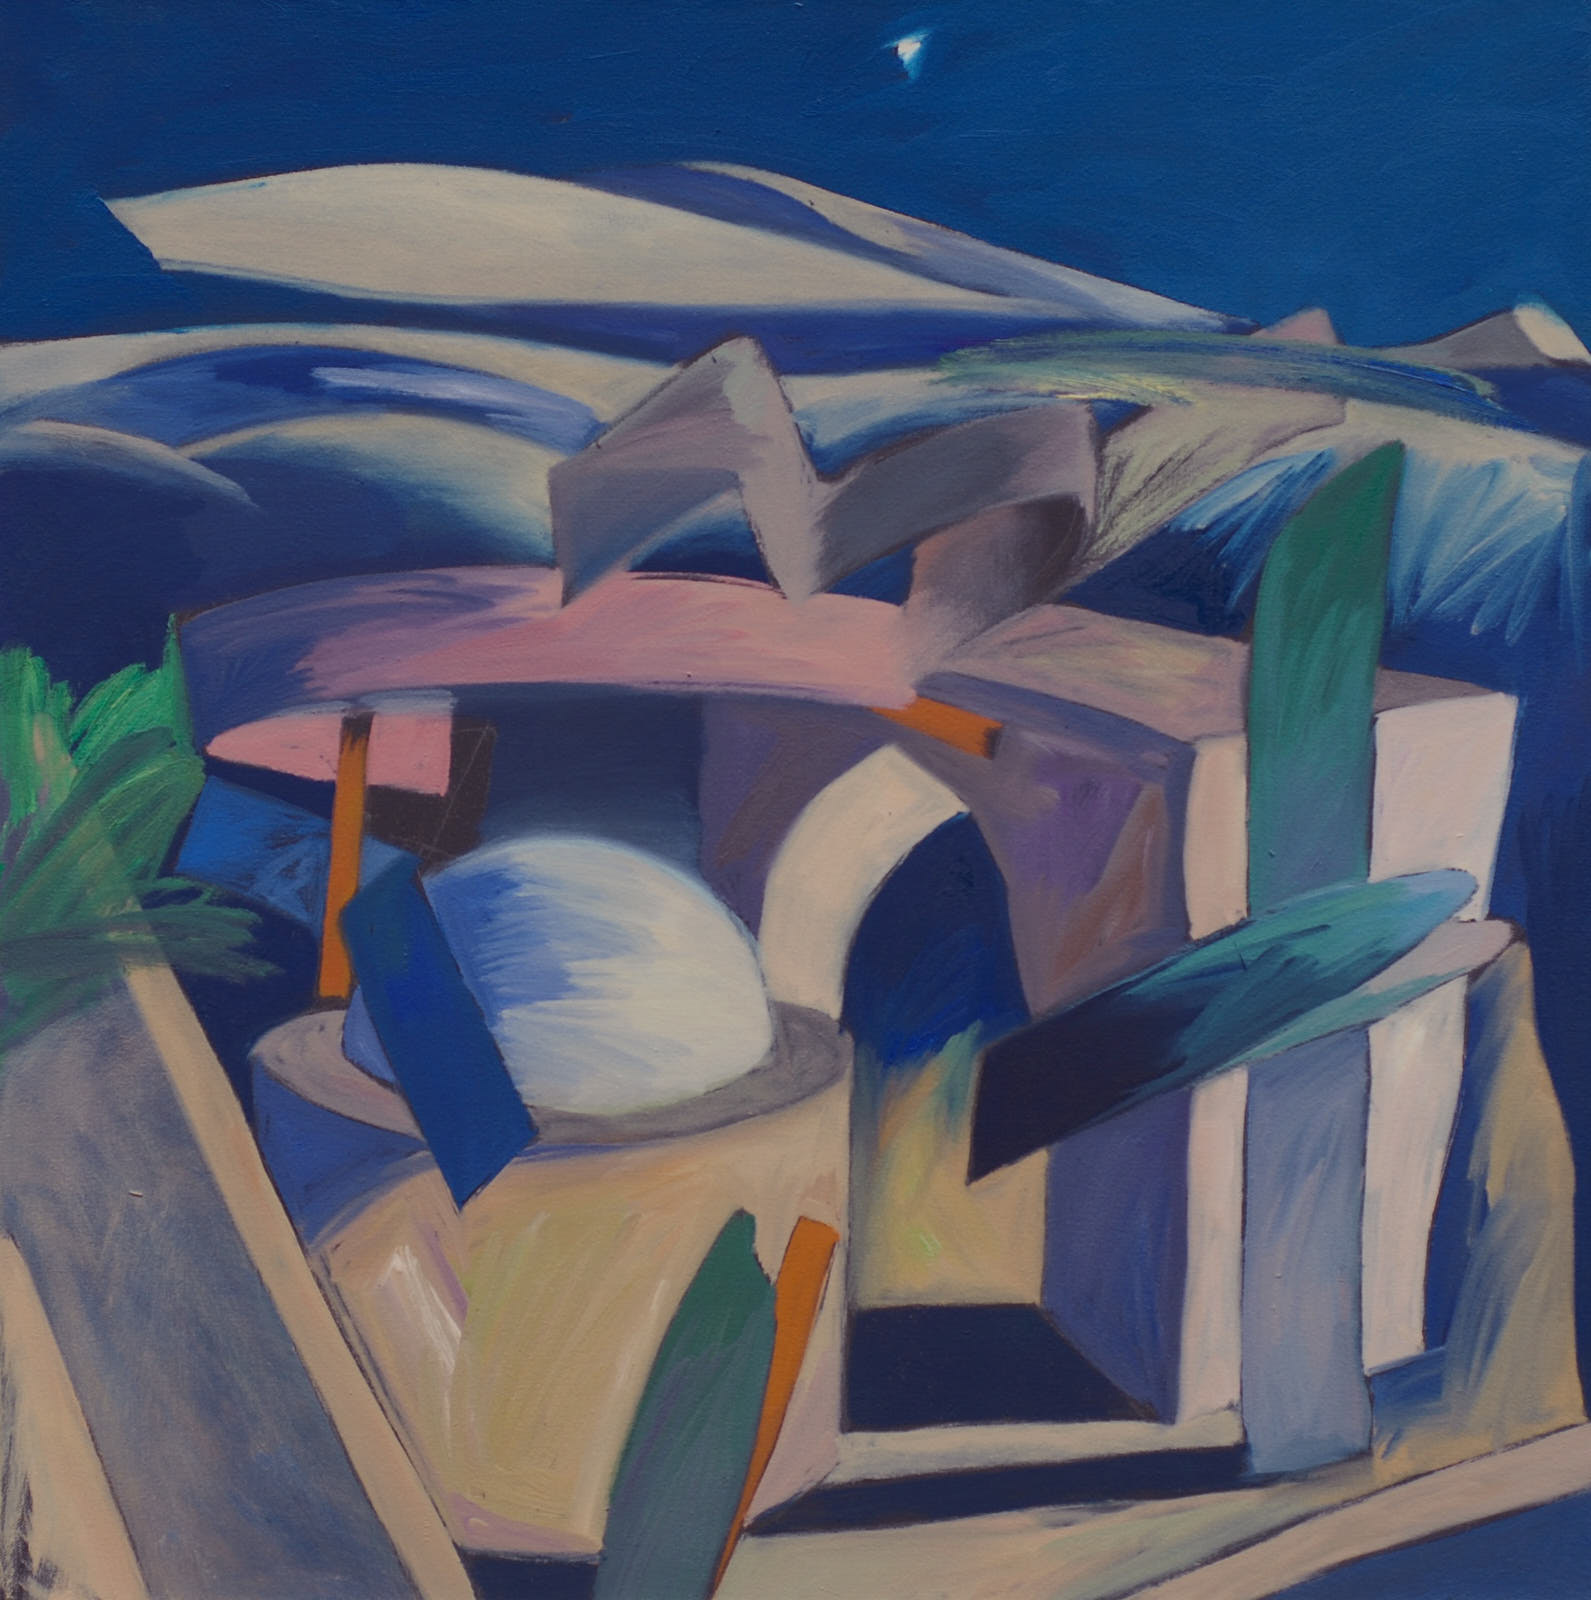 Desert Night  #7, 2001 oil on canvas. 27 x 27'' collection of Angela Miller